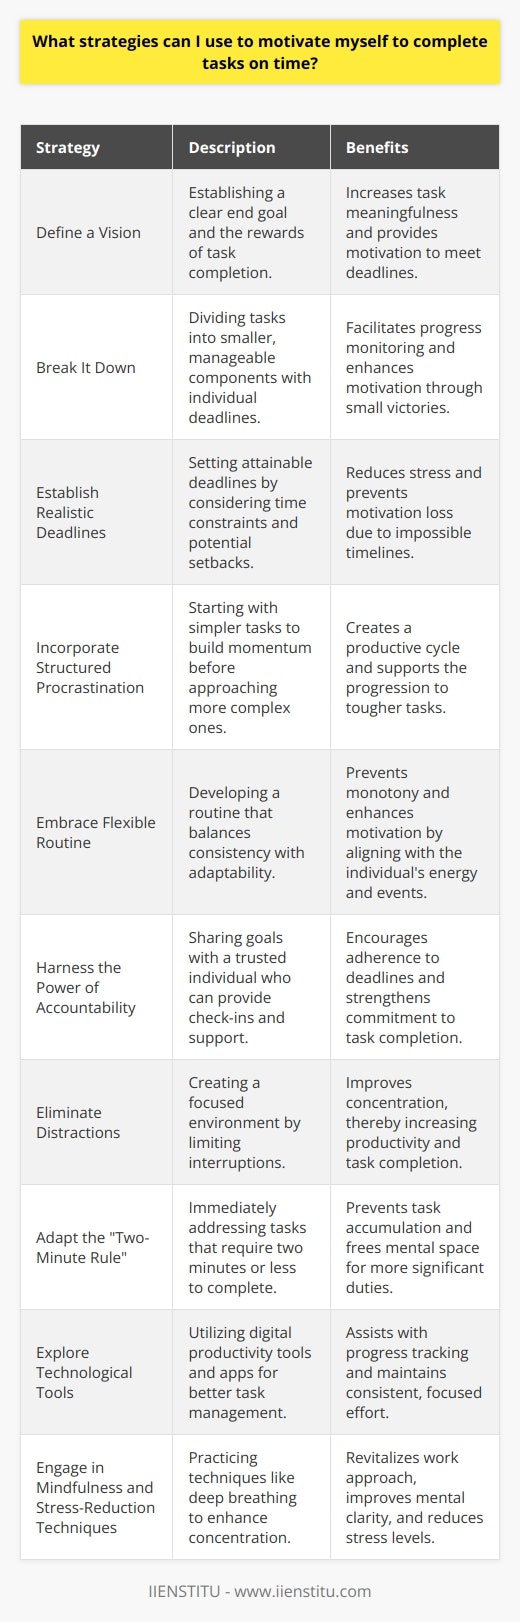 Effective time management and sustained motivation can be challenging, particularly when it comes to tackling a lengthy to-do list. Discovering personalized strategies to inspire timely completion of tasks can be instrumental in enhancing your productivity. By employing a convergence of techniques, you'll be better positioned to achieve your objectives within set deadlines. Here are some strategies to consider:Define a VisionStart by establishing a crystal clear vision of what you aim to accomplish. Envision the end result and the benefits of completing the task. This clarity will make the task more meaningful and give you a compelling reason to see it through on time.Break It DownLarge projects can be overwhelming, true motivation often blossoms from progress. Break down your tasks into smaller, more digestible components and set individual deadlines for these milestones. Celebrate small victories as stepping stones toward the larger goal.Establish Realistic DeadlinesAlign your task deadlines with a realistic appraisal of time needed, taking into account potential obstacles. Realistic deadlines reduce the stress of unattainable timeframes which can dampen motivation.Incorporate Structured ProcrastinationUse procrastination to your advantage by structuring tasks in order of priority. Begin with easier or more enjoyable tasks to build momentum. This can create a productive cycle that helps propel you toward tackling more challenging tasks.Embrace Flexible RoutineEstablish a flexible routine to balance consistency with adaptability. Fixed routines can become monotonous, so allow room for adjustment based on your day's flow, energy levels, and any unforeseen events.Harness the Power of AccountabilityShare your goals and timelines with someone you trust. Regular check-ins with this person can offer the necessary nudge to remain on track, reinforcing your commitment to the deadlines you’ve set.Eliminate DistractionsCreate an environment conducive to focus. Identify what commonly distracts you and proactively mitigate these interruptions. This might mean turning off notifications on digital devices or finding a secluded space to work.Adapt the Two-Minute RuleIf you encounter a task that can be done in two minutes or less, do it immediately. This rule, championed by productivity experts, helps clear minor tasks that can clutter your mental space, allowing you to focus on more significant tasks.Explore Technological ToolsUse digital tools and apps to streamline productivity. For instance, IIENSTITU offers a range of online resources that can equip you with skills to manage your time and tasks more effectively. Such tools can assist in tracking progress and maintaining focused effort.Engage in Mindfulness and Stress-Reduction TechniquesMindfulness and stress-management practices can enhance concentration and mental clarity. Techniques like deep breathing or taking a walk in nature can revitalize your approach to work.Consistently applying these strategies will not only help you stay motivated and complete tasks on time but also pave the way for a balanced approach to productivity that can extend beyond work into other facets of life. Enjoying the journey is just as crucial as crossing off tasks on your checklist.